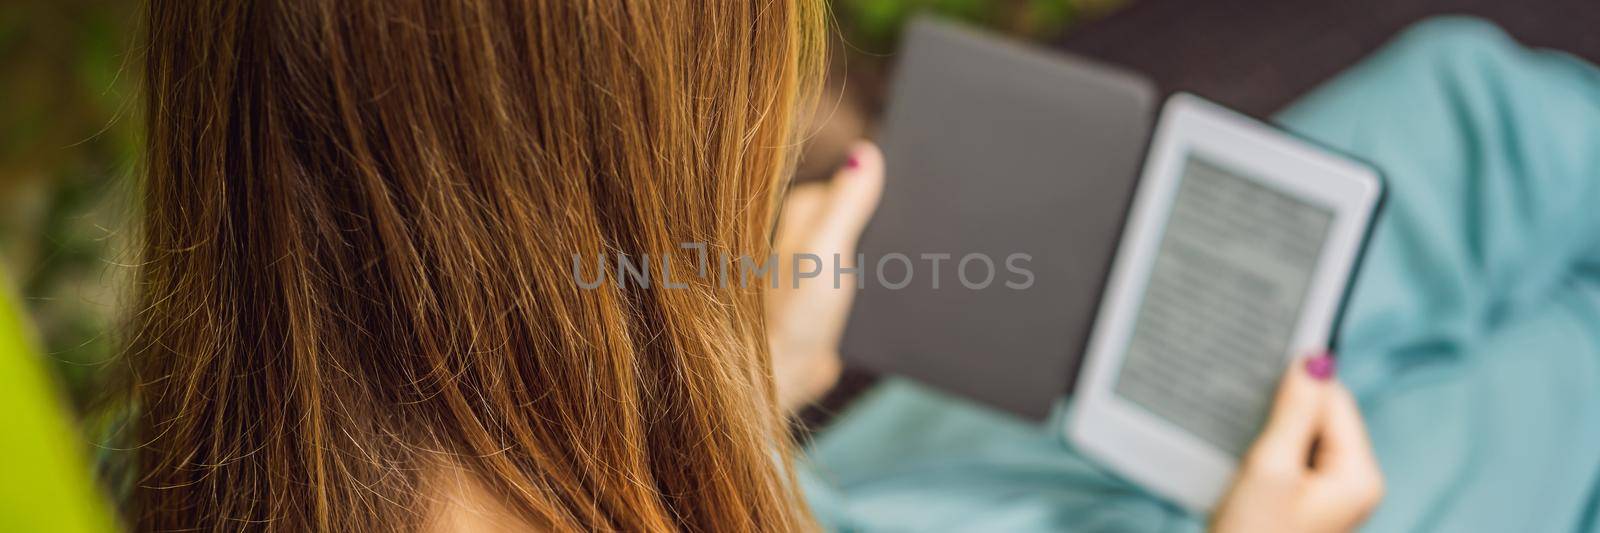 Woman reads e-book on deck chair in the garden BANNER, LONG FORMAT by galitskaya